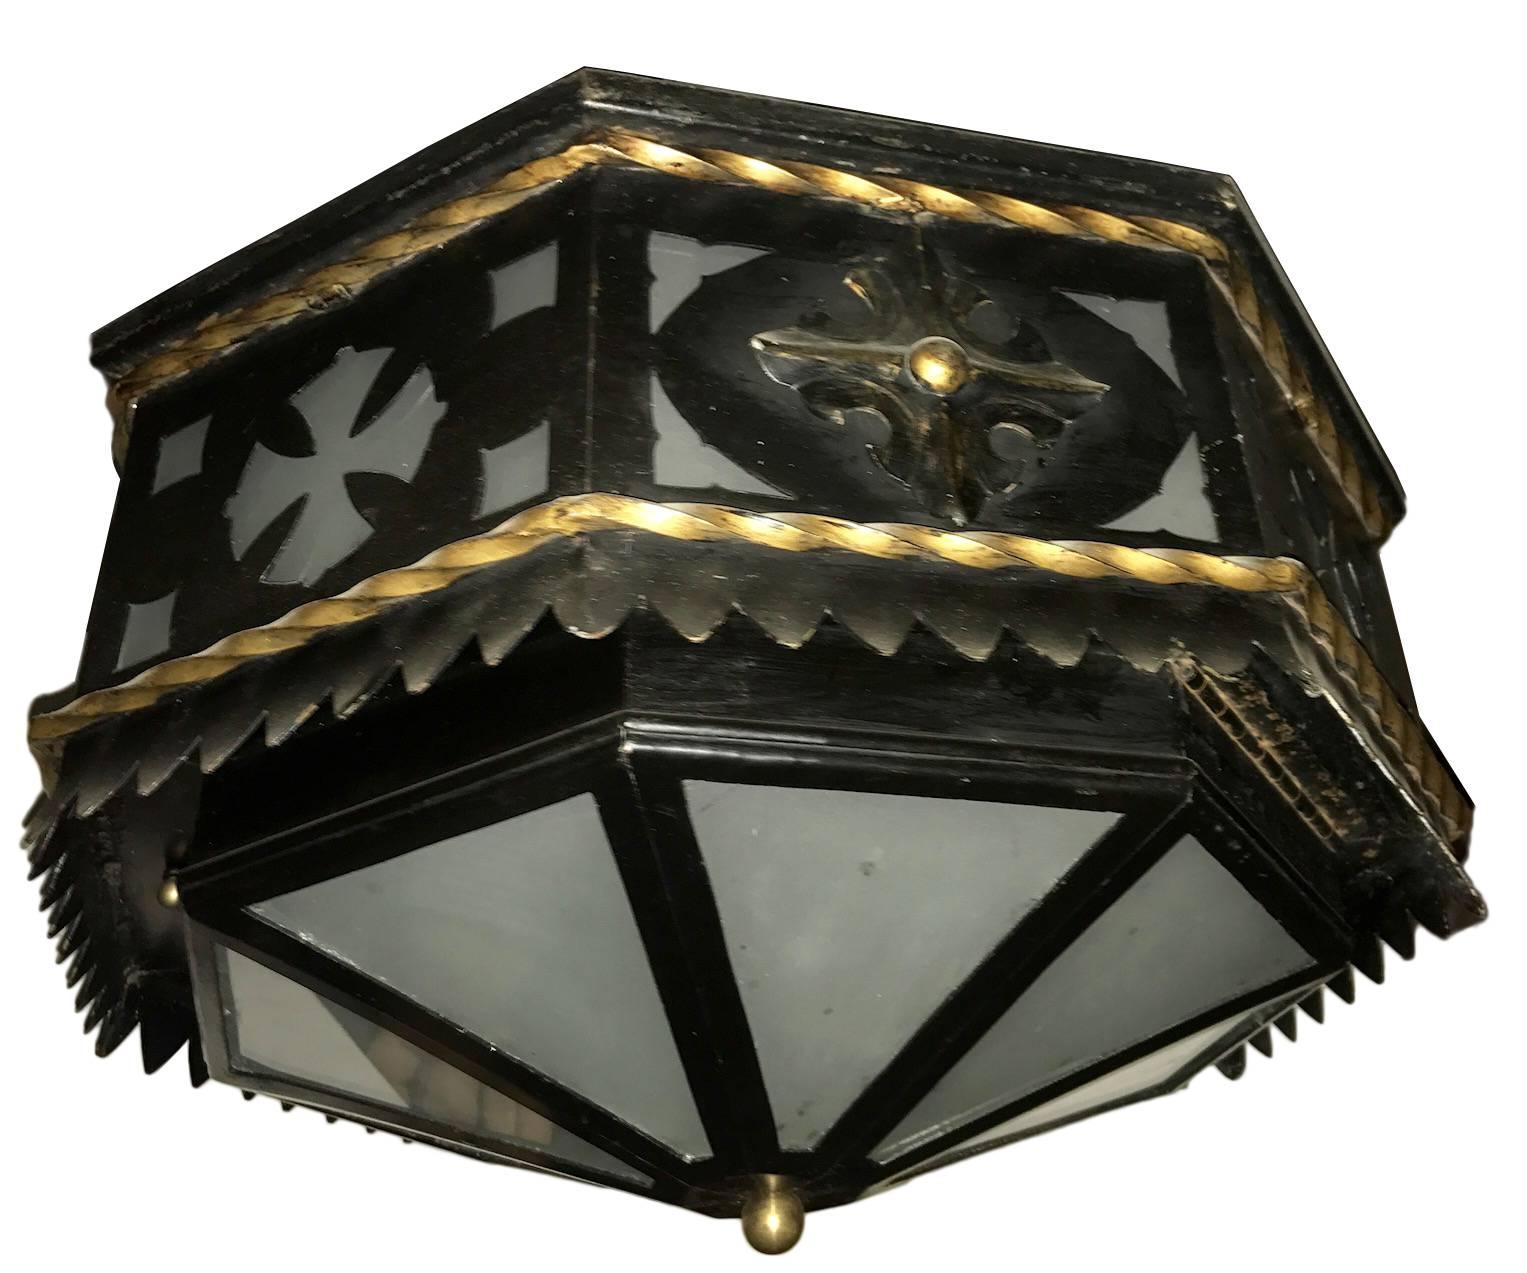 A single 1940s wrought iron flush mounted light fixture with painted and gilt finish, frosted glass insets.
Measurements
Diameter: 19